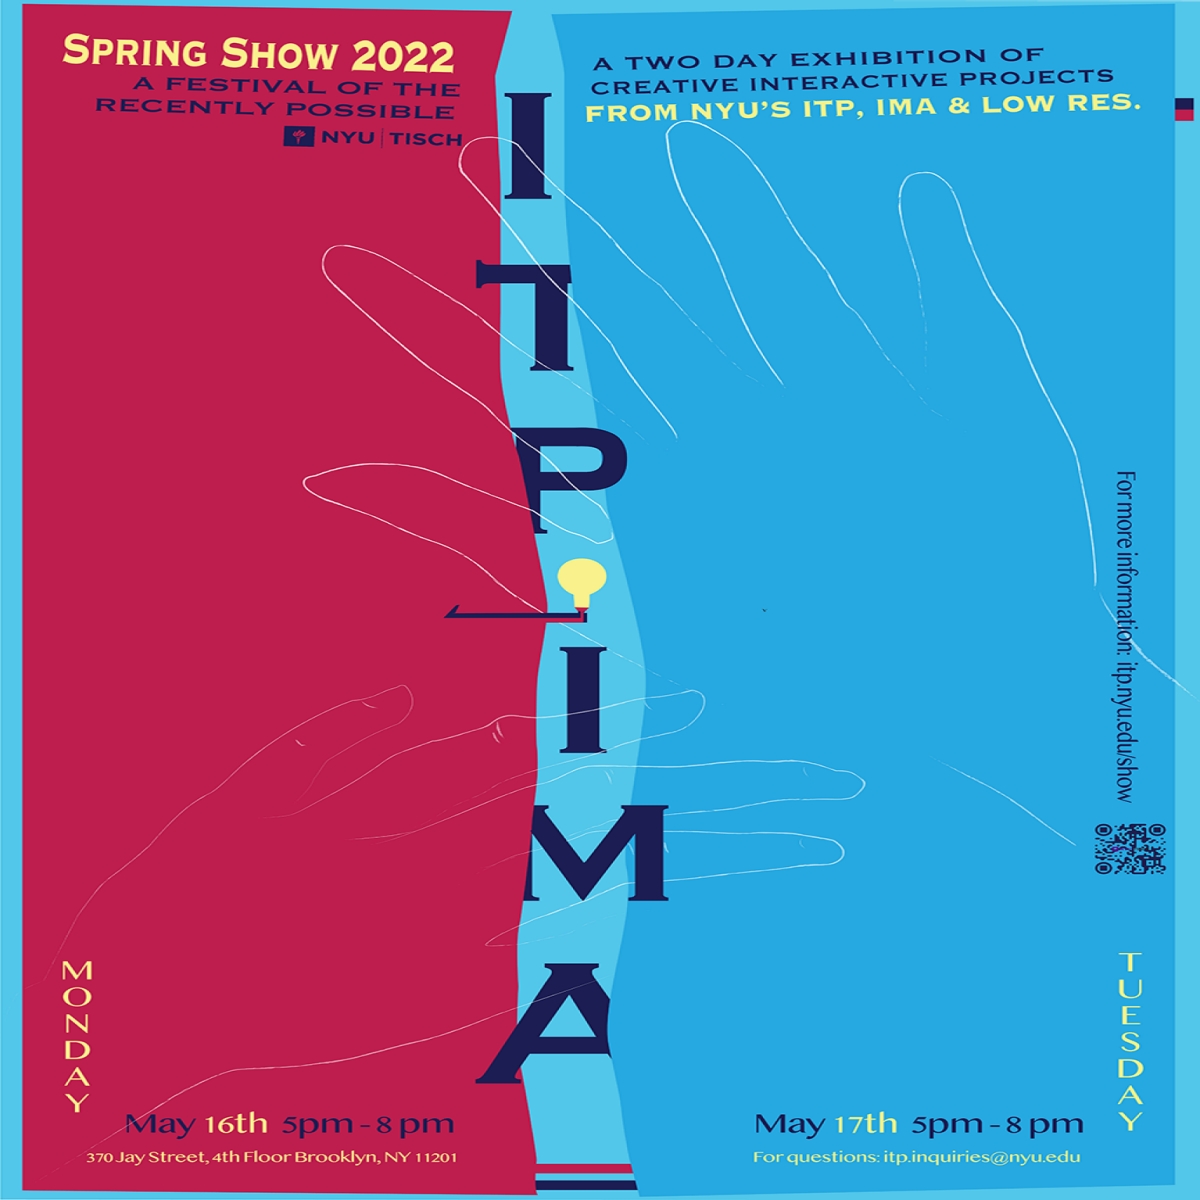 ITP/IMA Spring Show 22 Monday, May 16th, 5 PM - 8 PM (EST) AND Tuesday, May 17th, 5 PM - 8 PM